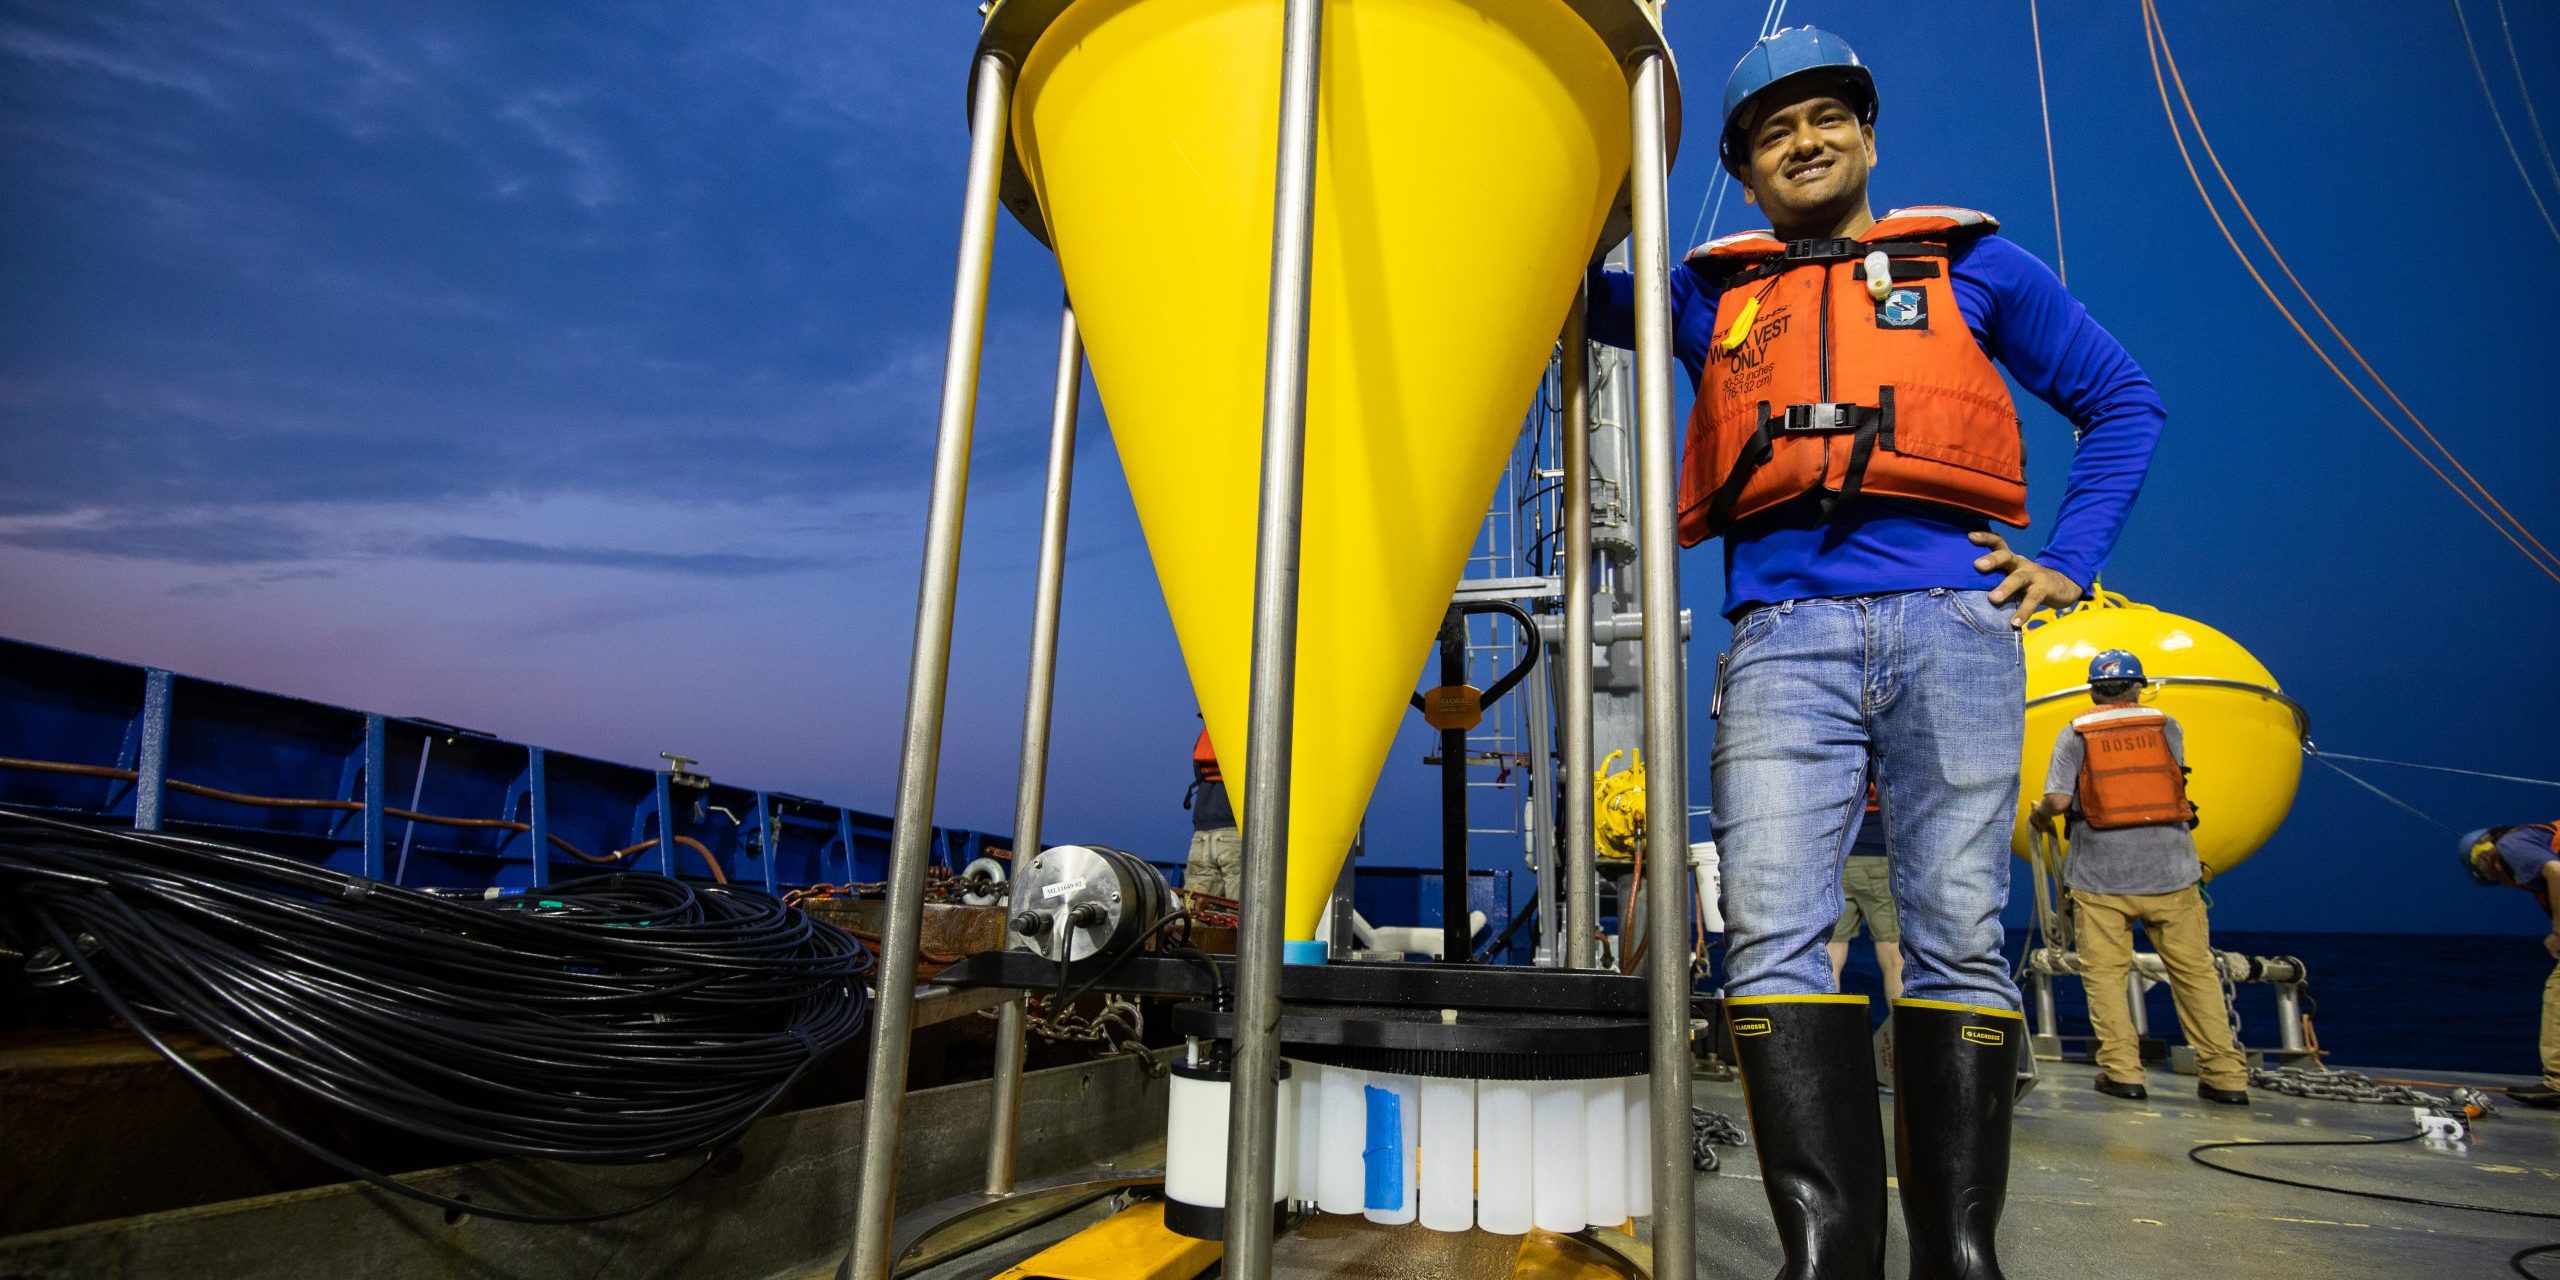 Postdoctoral scholar, Wokil Bam of Café Thorium Lab, stands tall next to a large bottom tethered trap on the stern of R/V Neil Armstrong. The trap will collect falling organic materials in the twilight zone to better understand how this layer helps the ocean sequester atmospheric carbon.